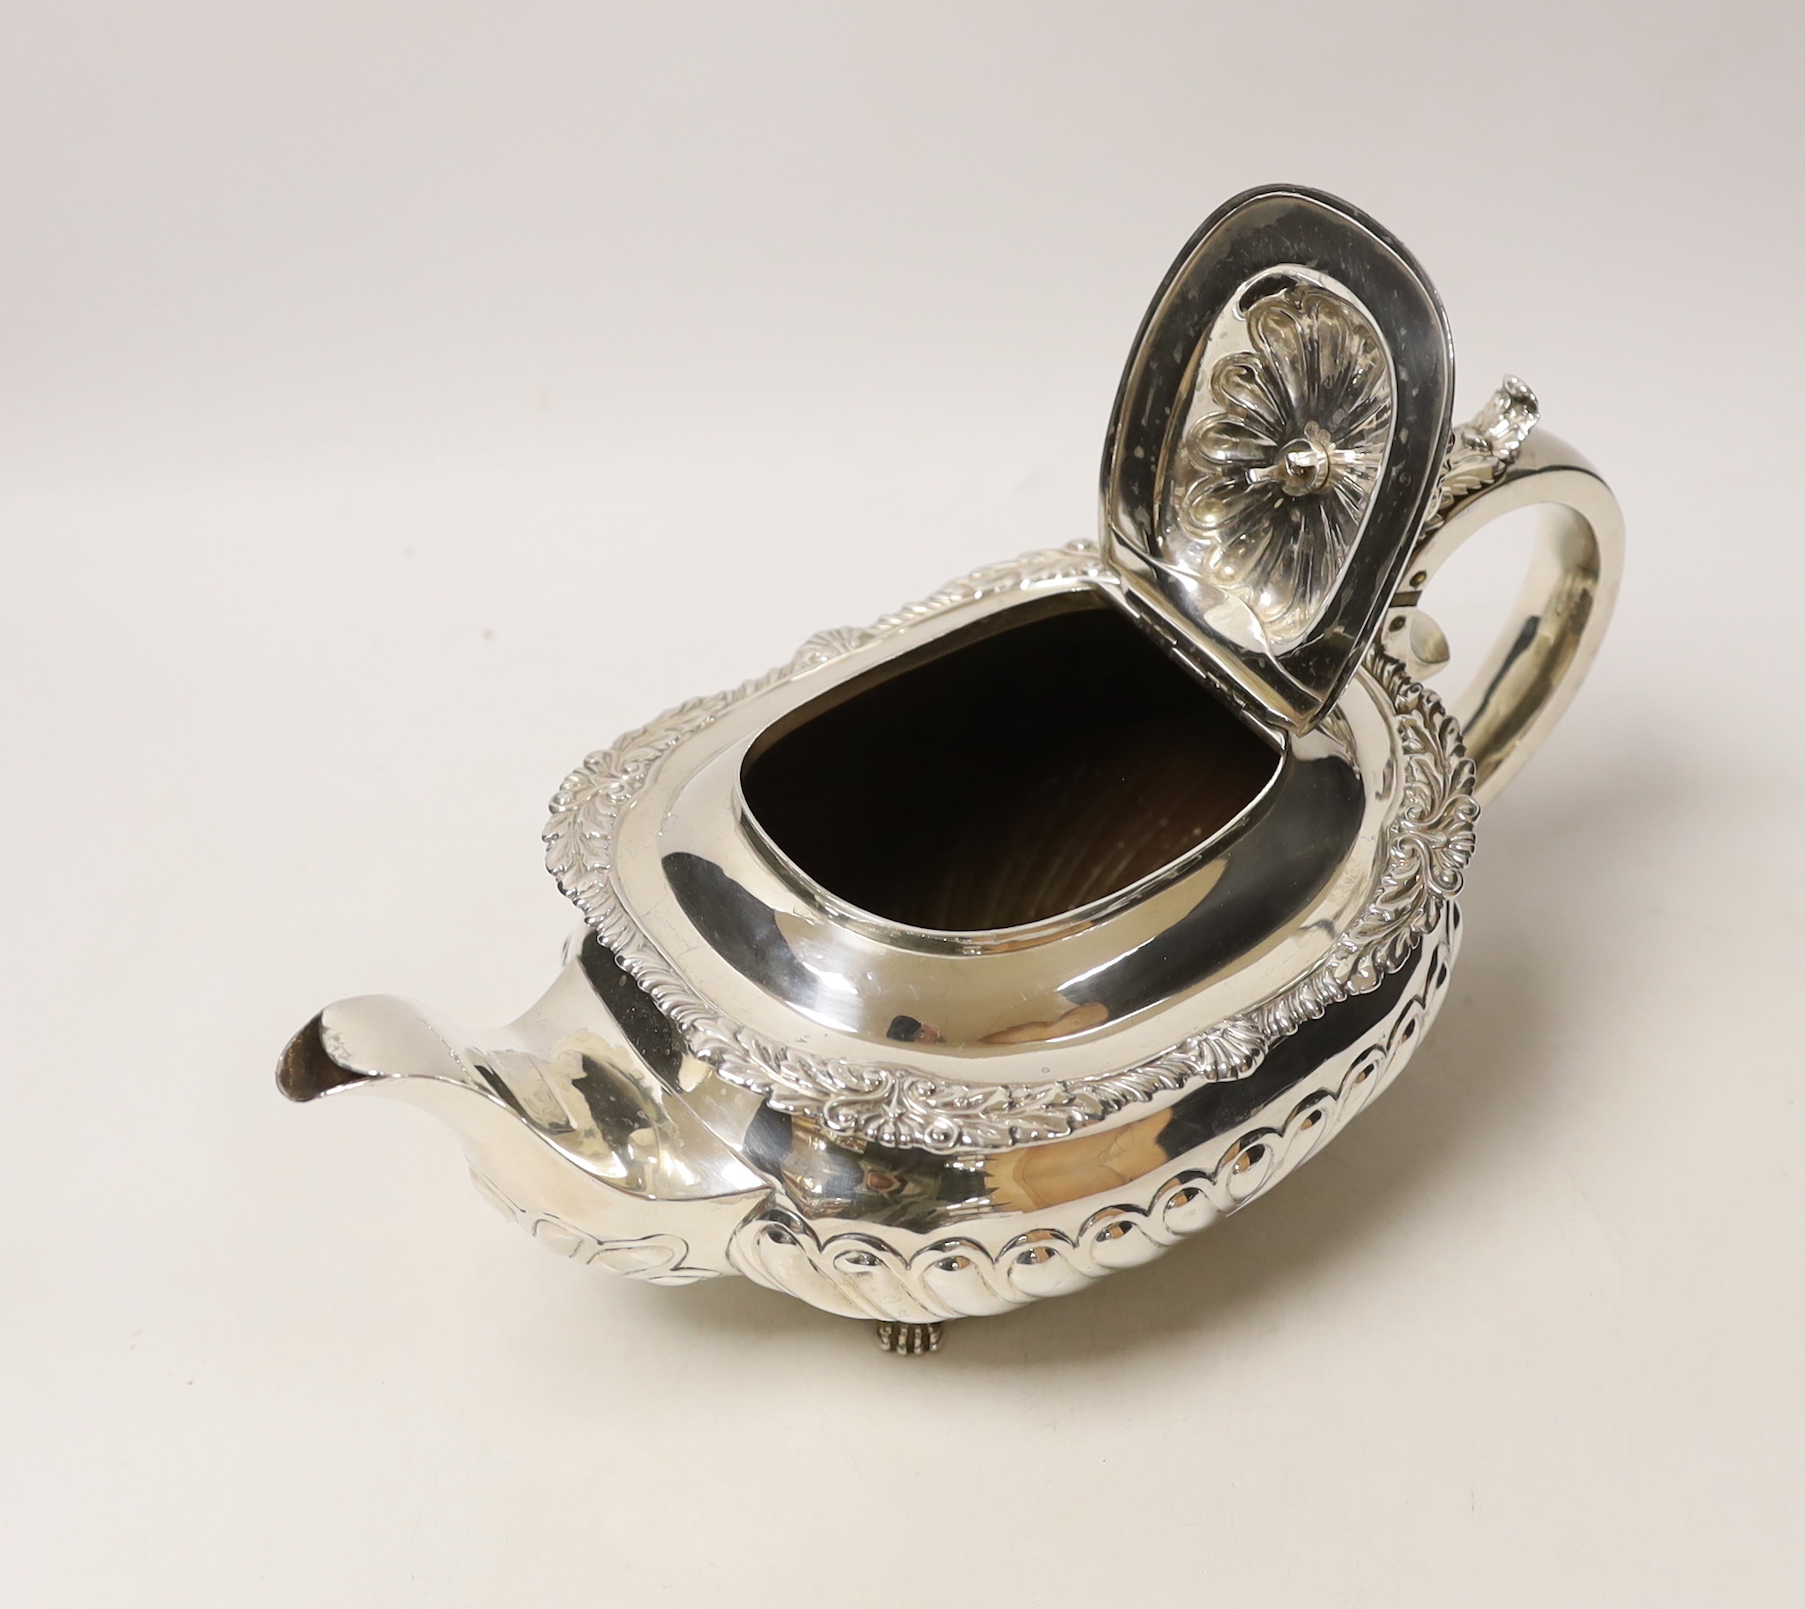 A George IV demi-fluted silver oval tea pot, maker RP, London, 1823, gross weight 23.2oz, CITES Submission reference, 4XP4B3AZ